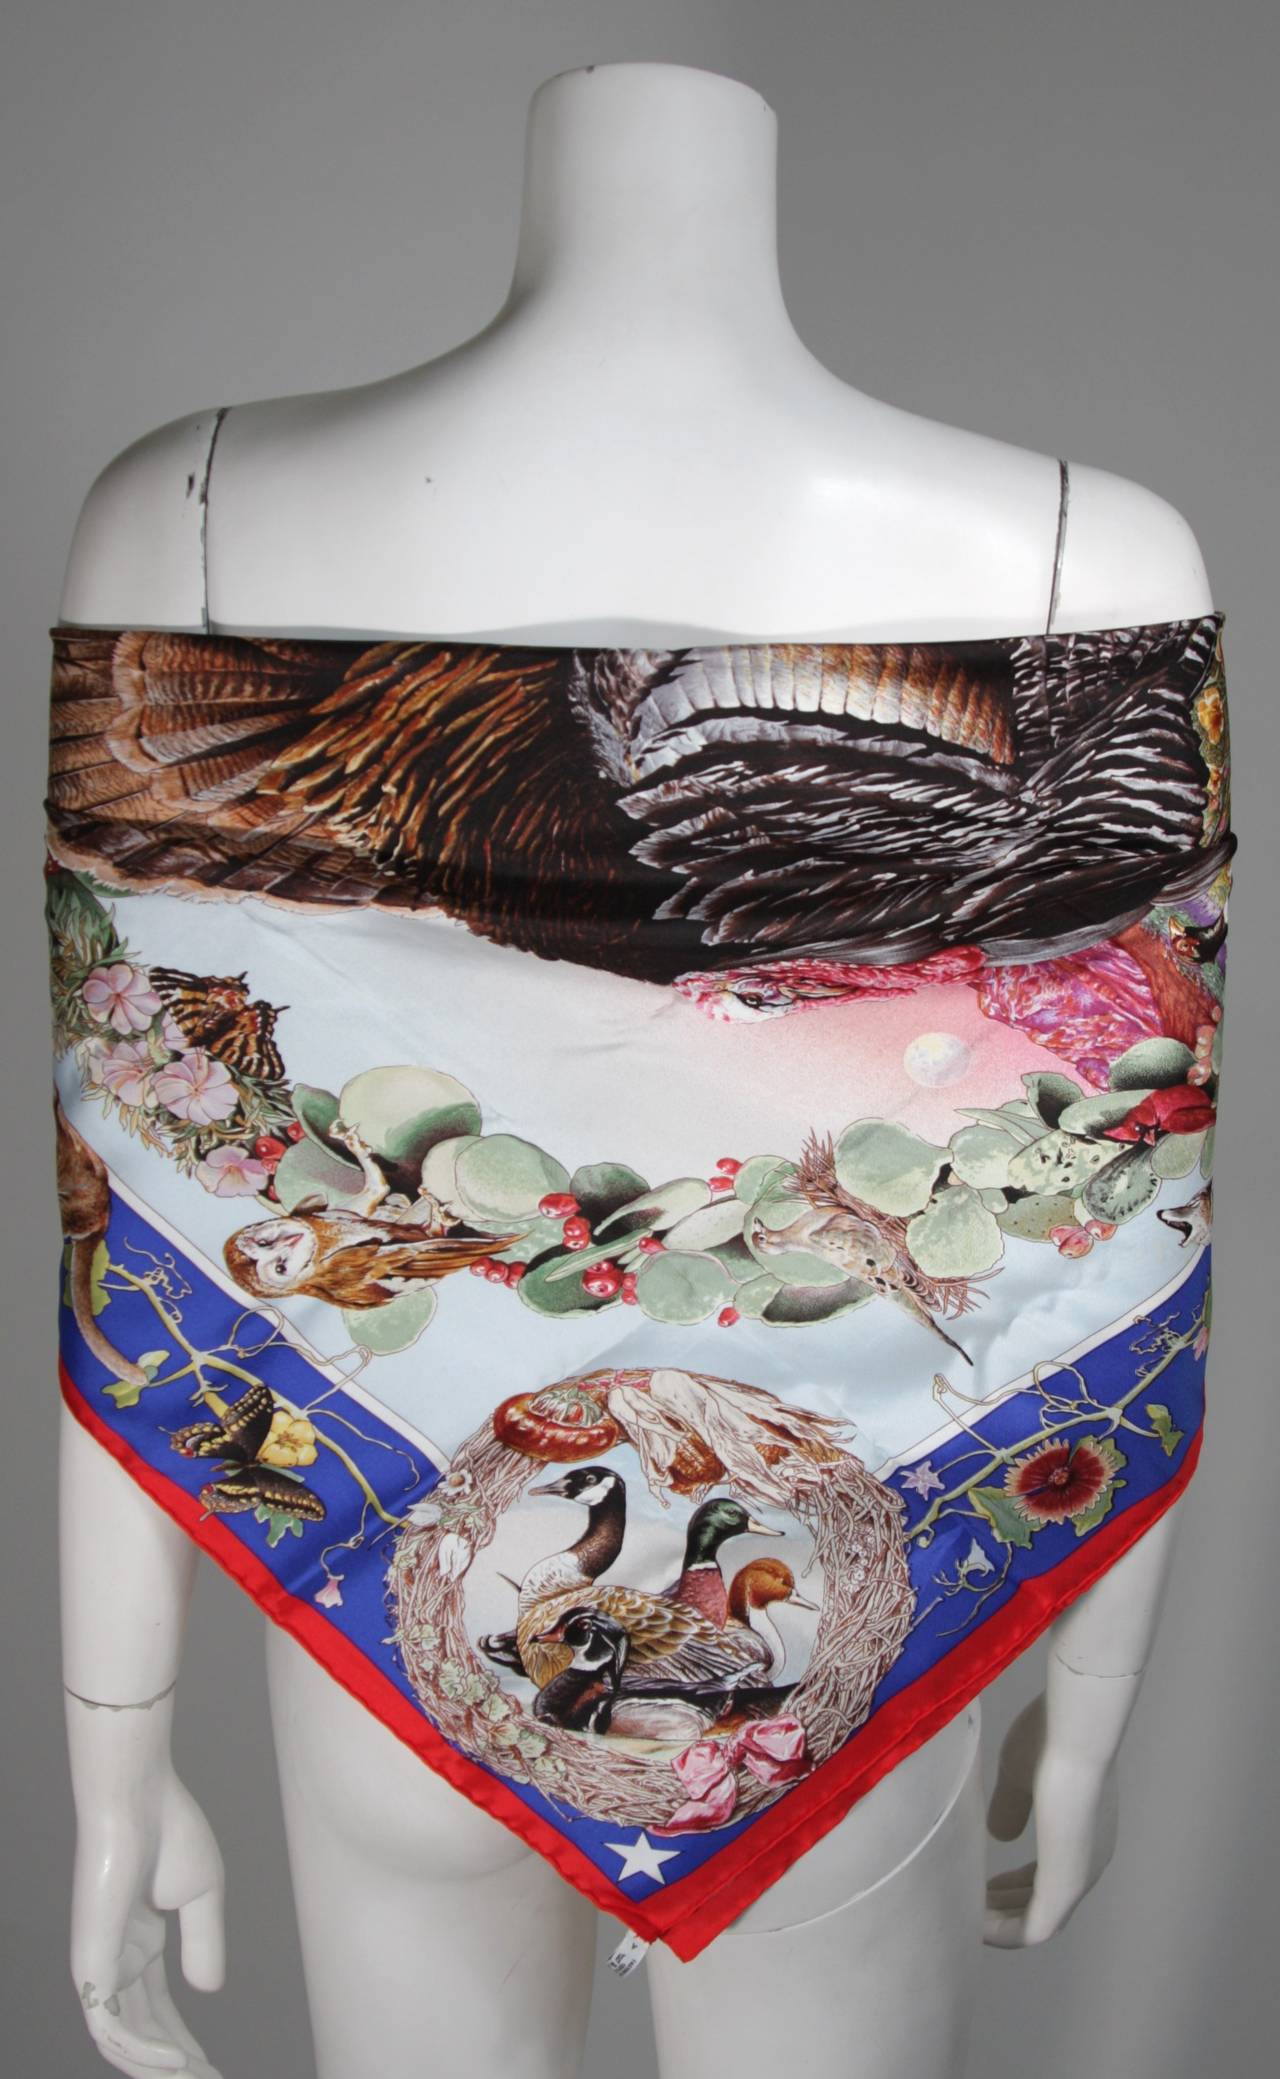 Hermes Silk twill wildlife of Texas scarf. At the center is a grand wild turkey surrounded by the many indigenous creatures of the great state of Texas.
The border is red, then blue, with white between the center pale blue sky. 
In excellent